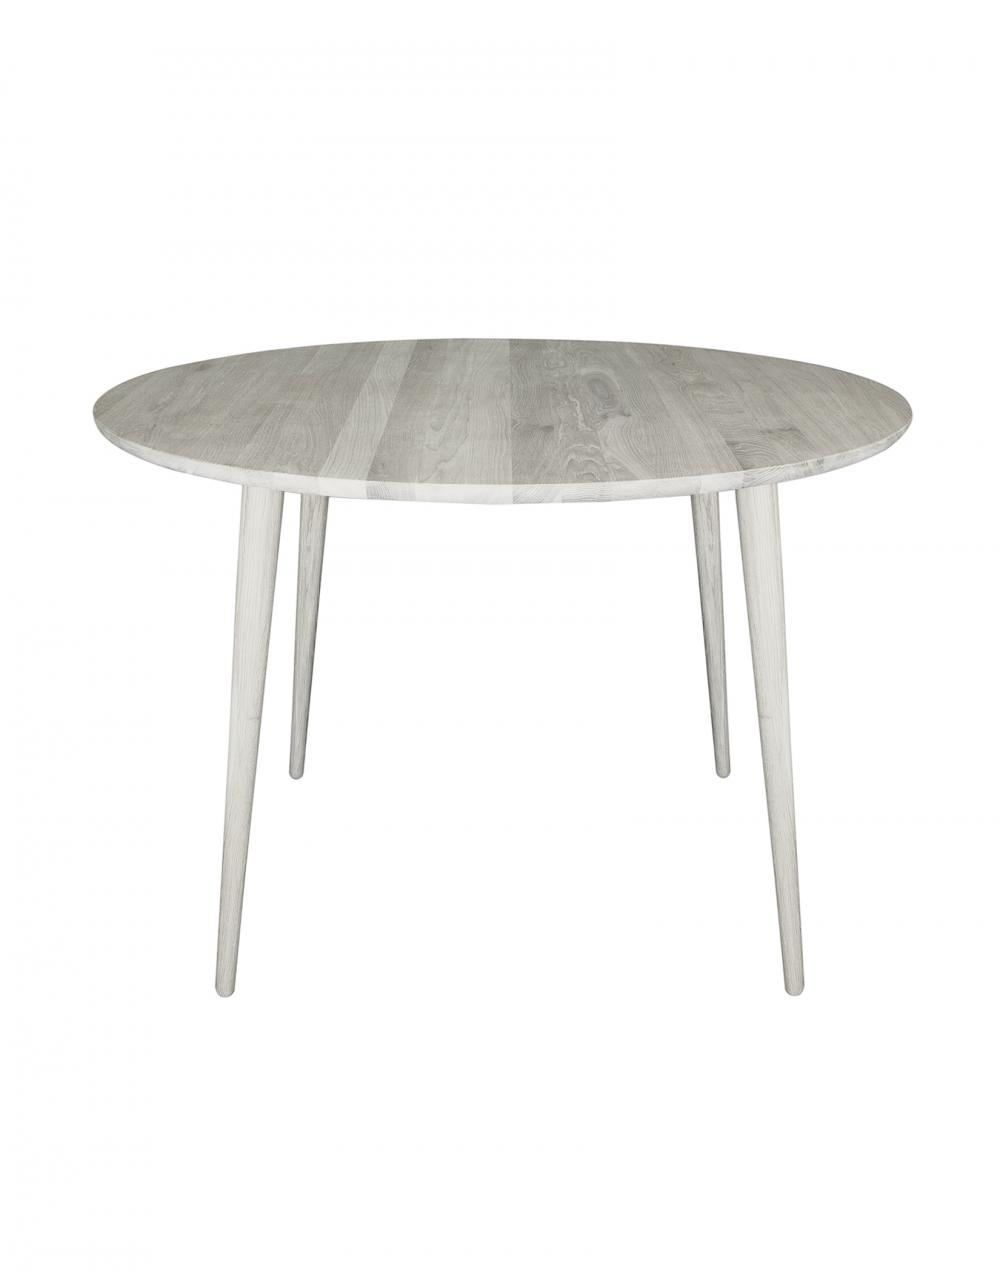 Non Dining Table 110cm Round Smoked